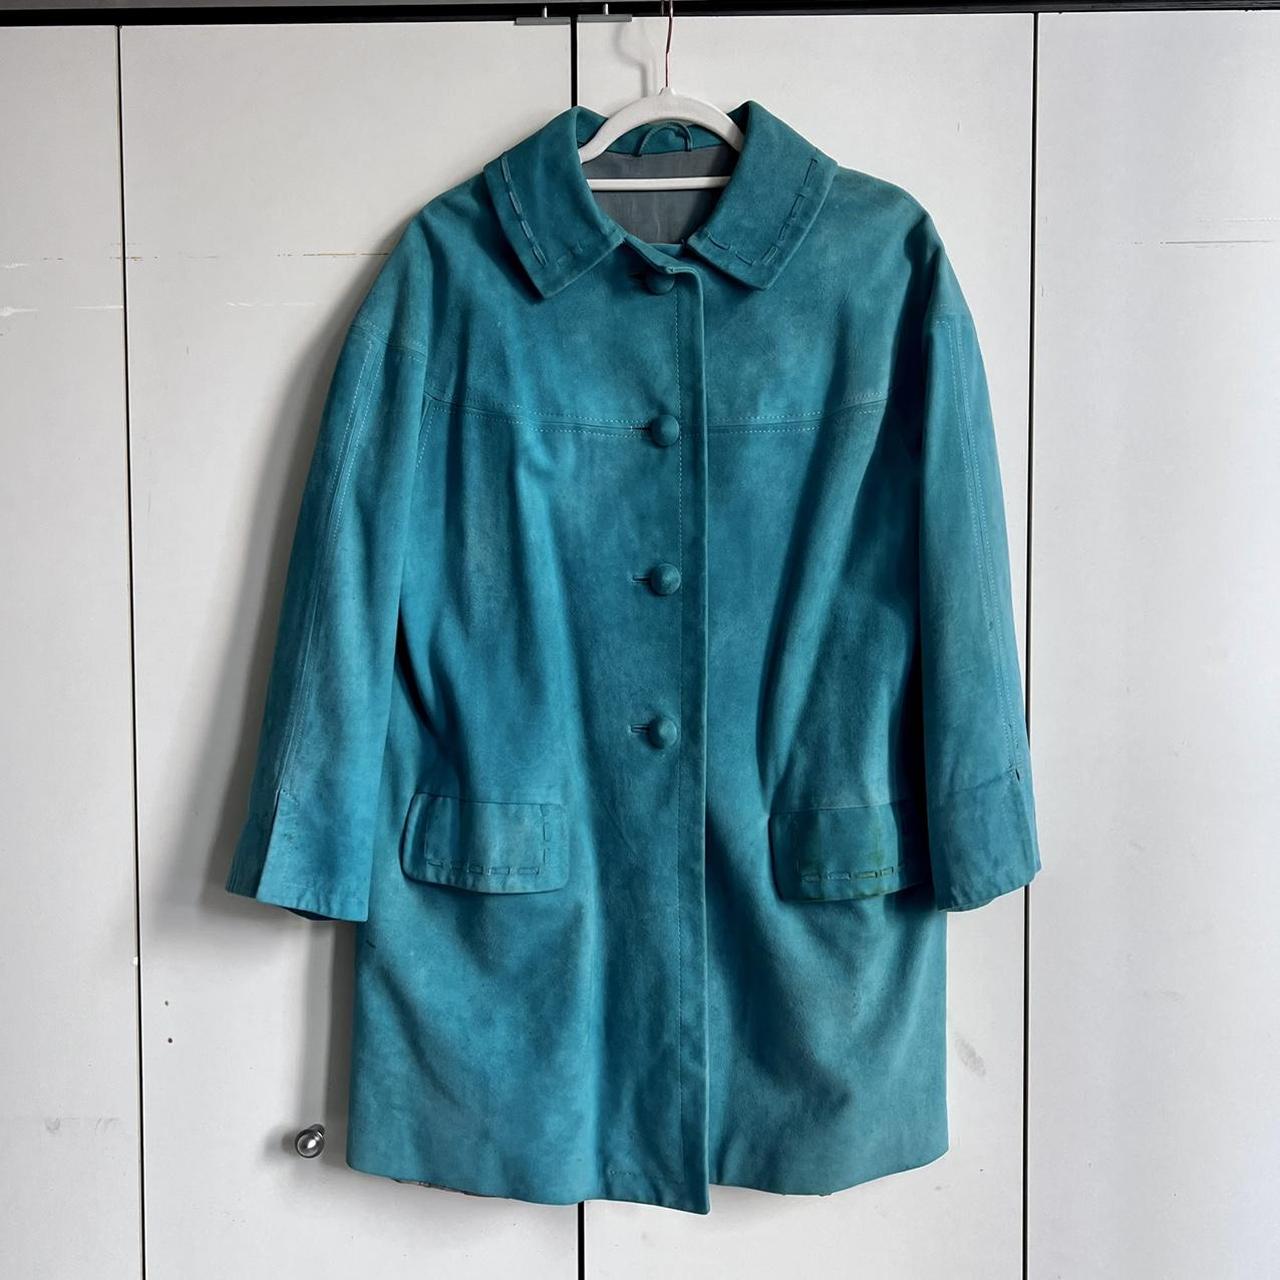 Vintage turquoise suede leather trench coat /... - Depop